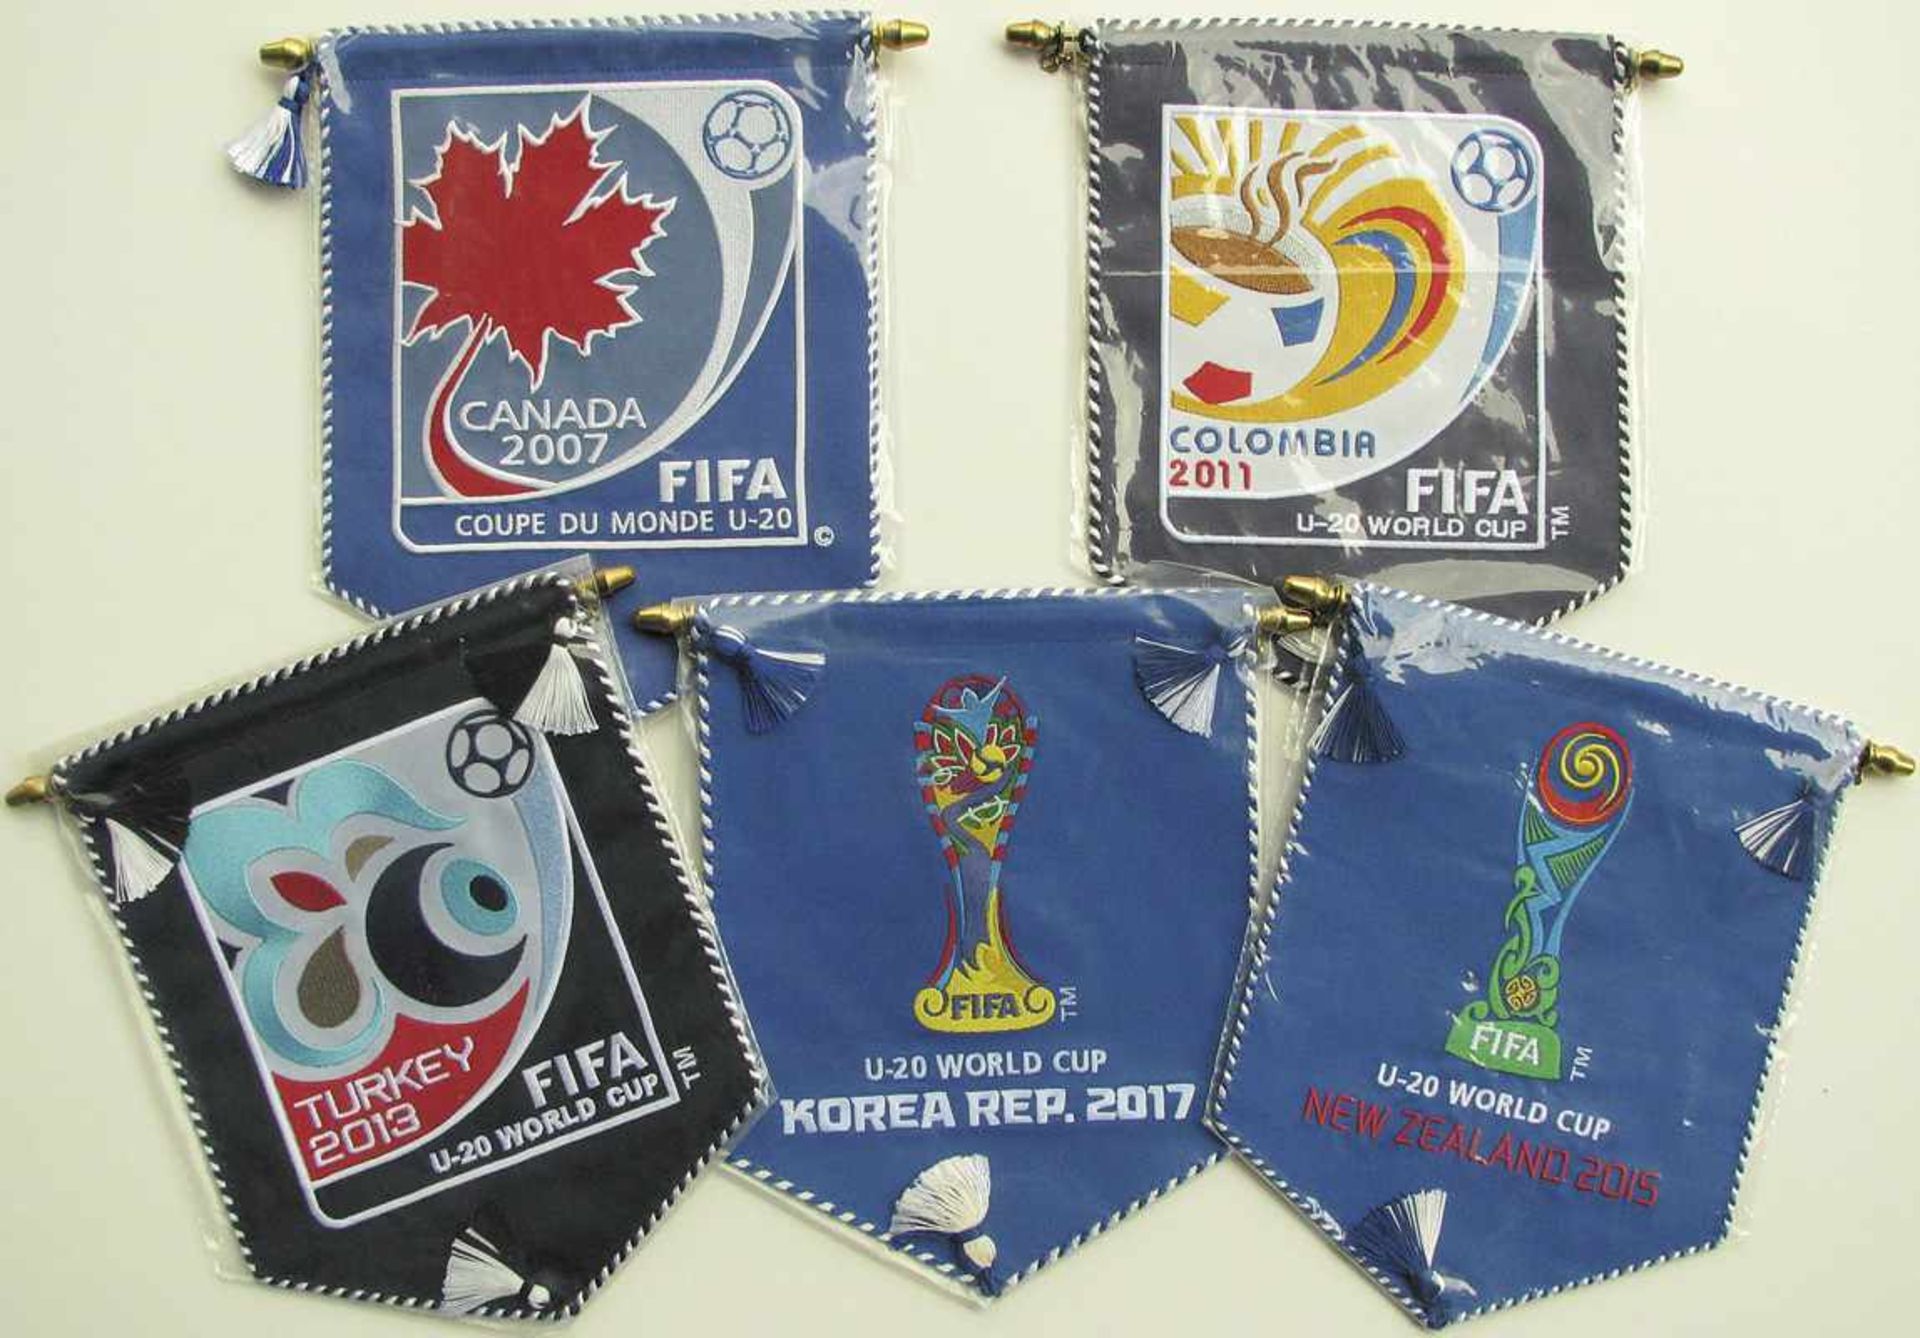 FIFA pennants "U-20 World Cup" - 5 official FIFA pennants "U-20 World Cup" from the years 2007 to